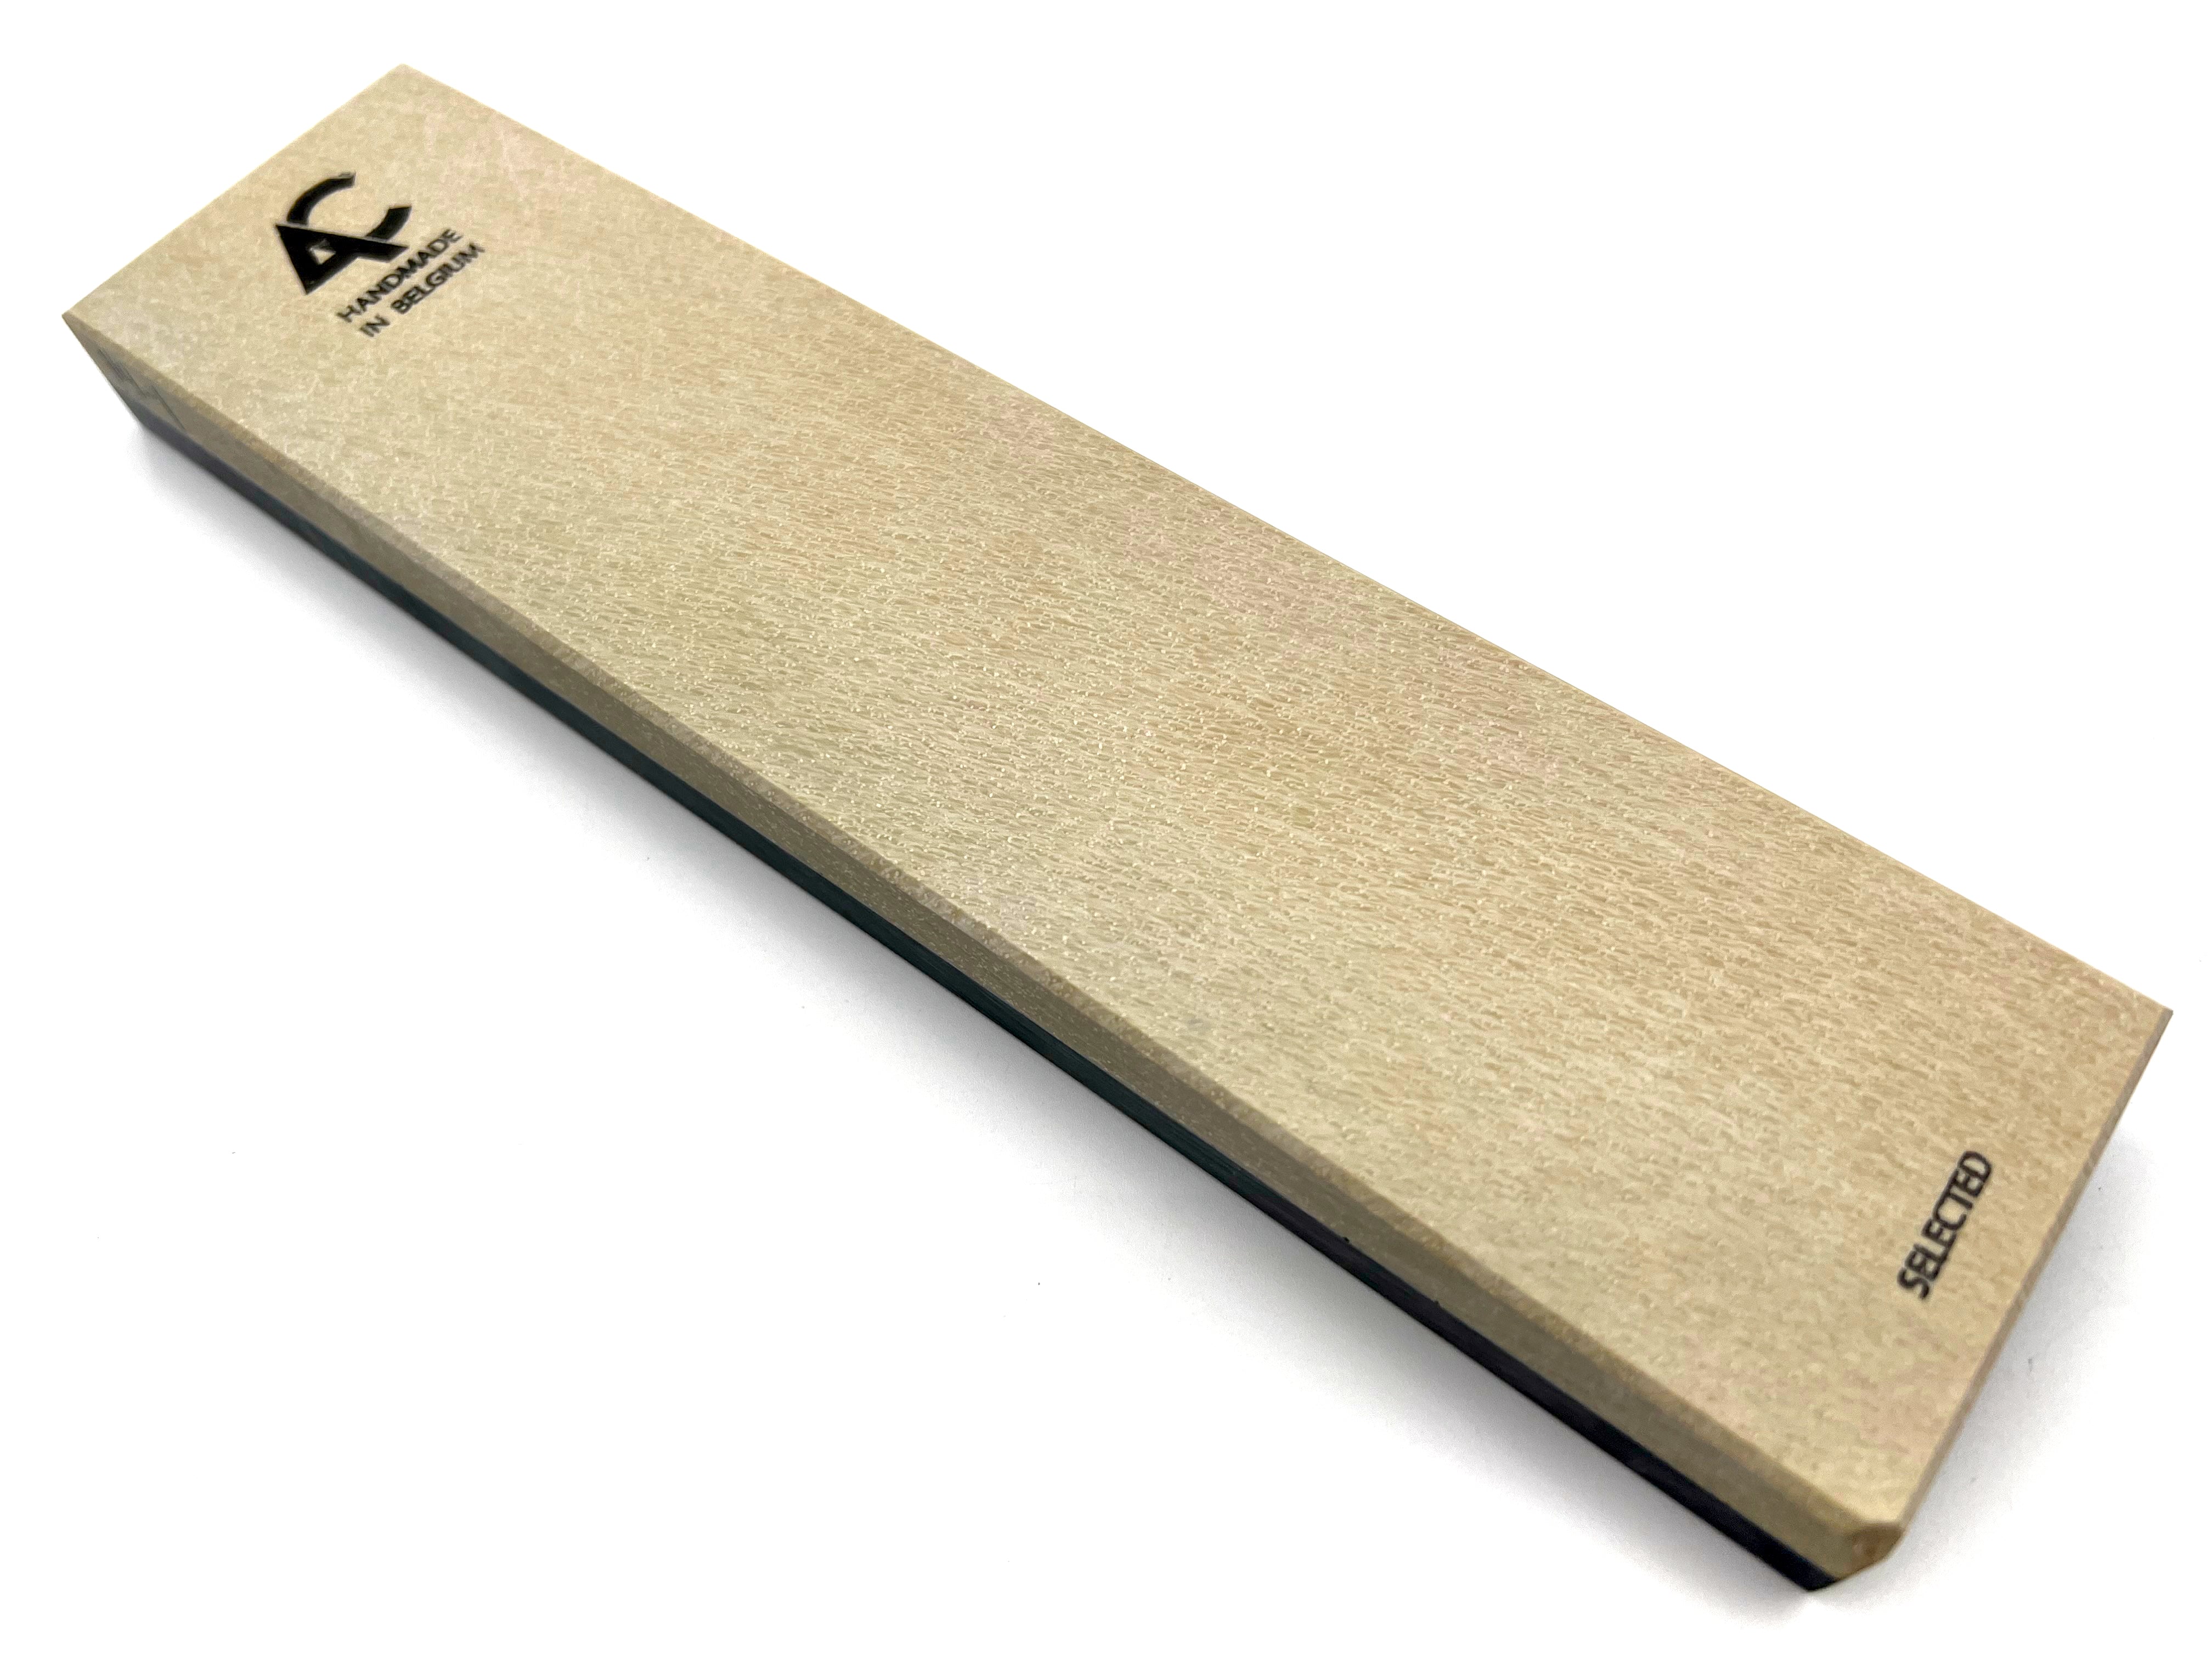 Belgian Coticule - 250mm x 60mm (9.8 x 2.4") Select Grade Sharpening Stone with Slurry Stone